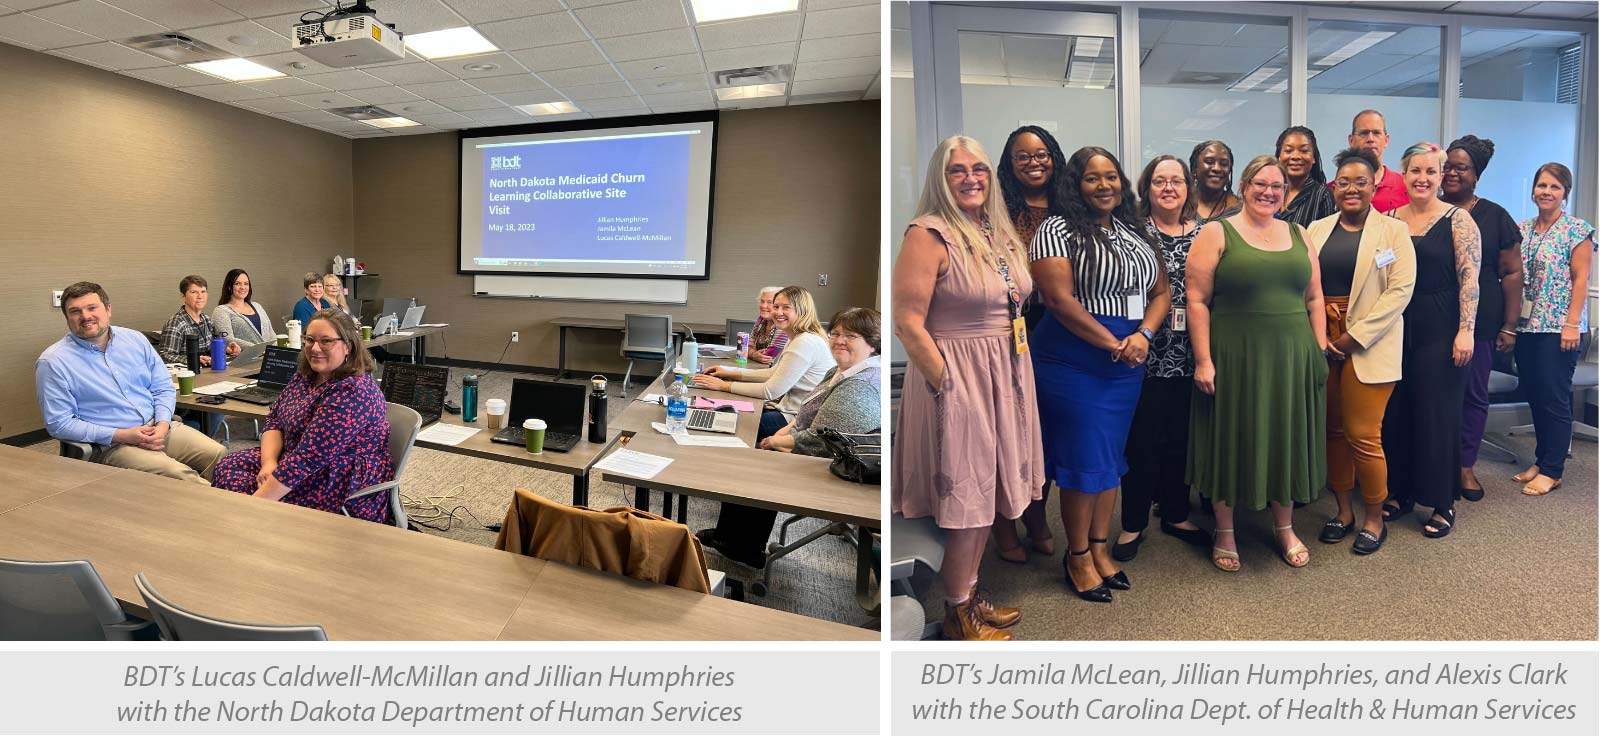 Left Image: BDT's Lucas Caldwell-McMillan and Jillian Humphries with the North Dakota Department of Human Services; Right Image: BDT's Jamila McLean, Jillian Humphries, and Alexis Clark with the South Carolina Dept. of Health & Human Services